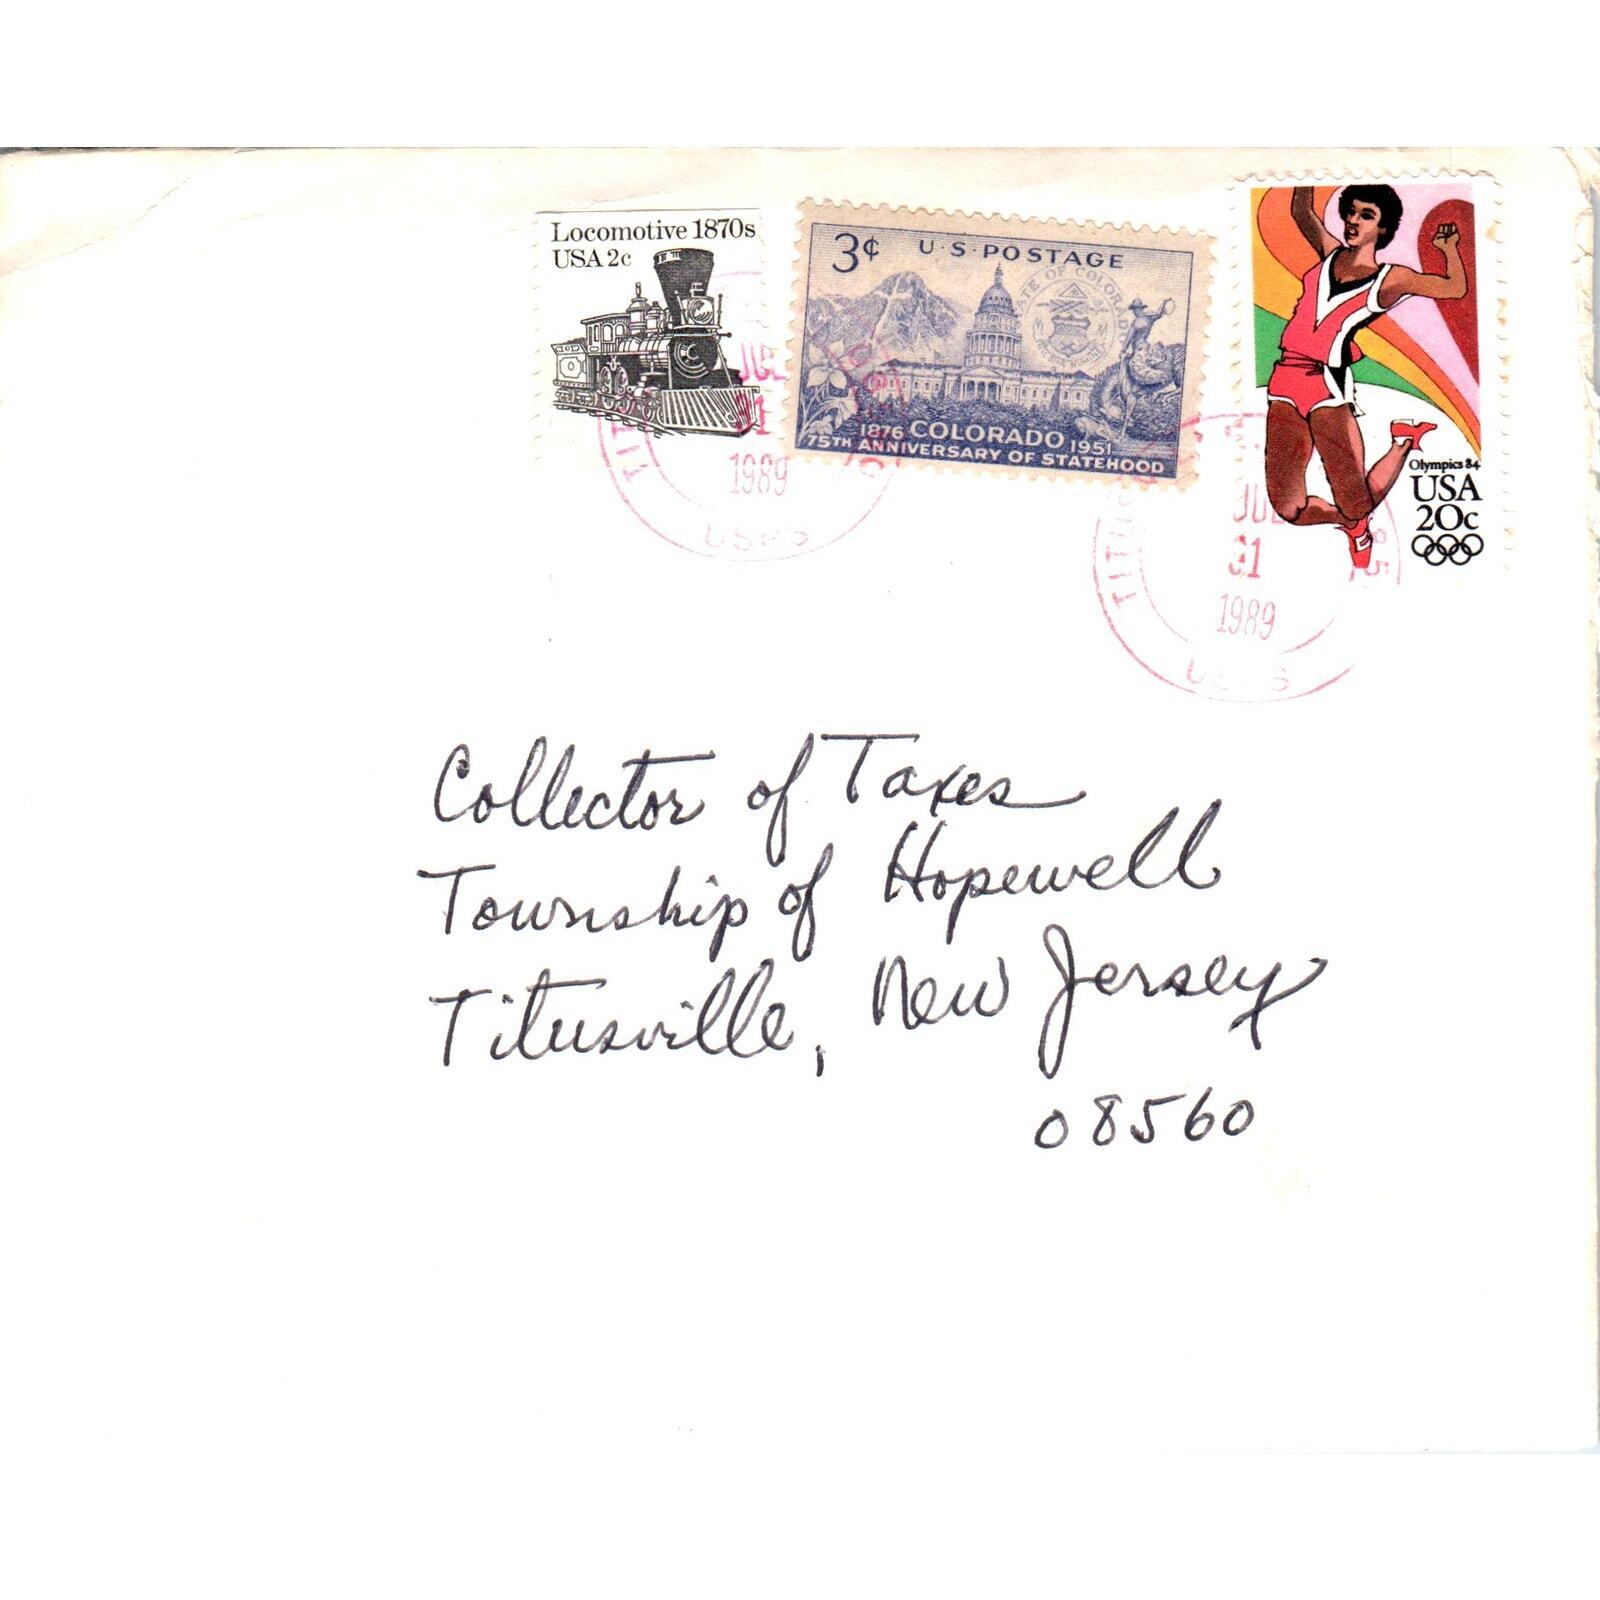 1989 Collector of Taxes Titusville NJ 84 Olympics Postal Cover Envelope TG7-PC3